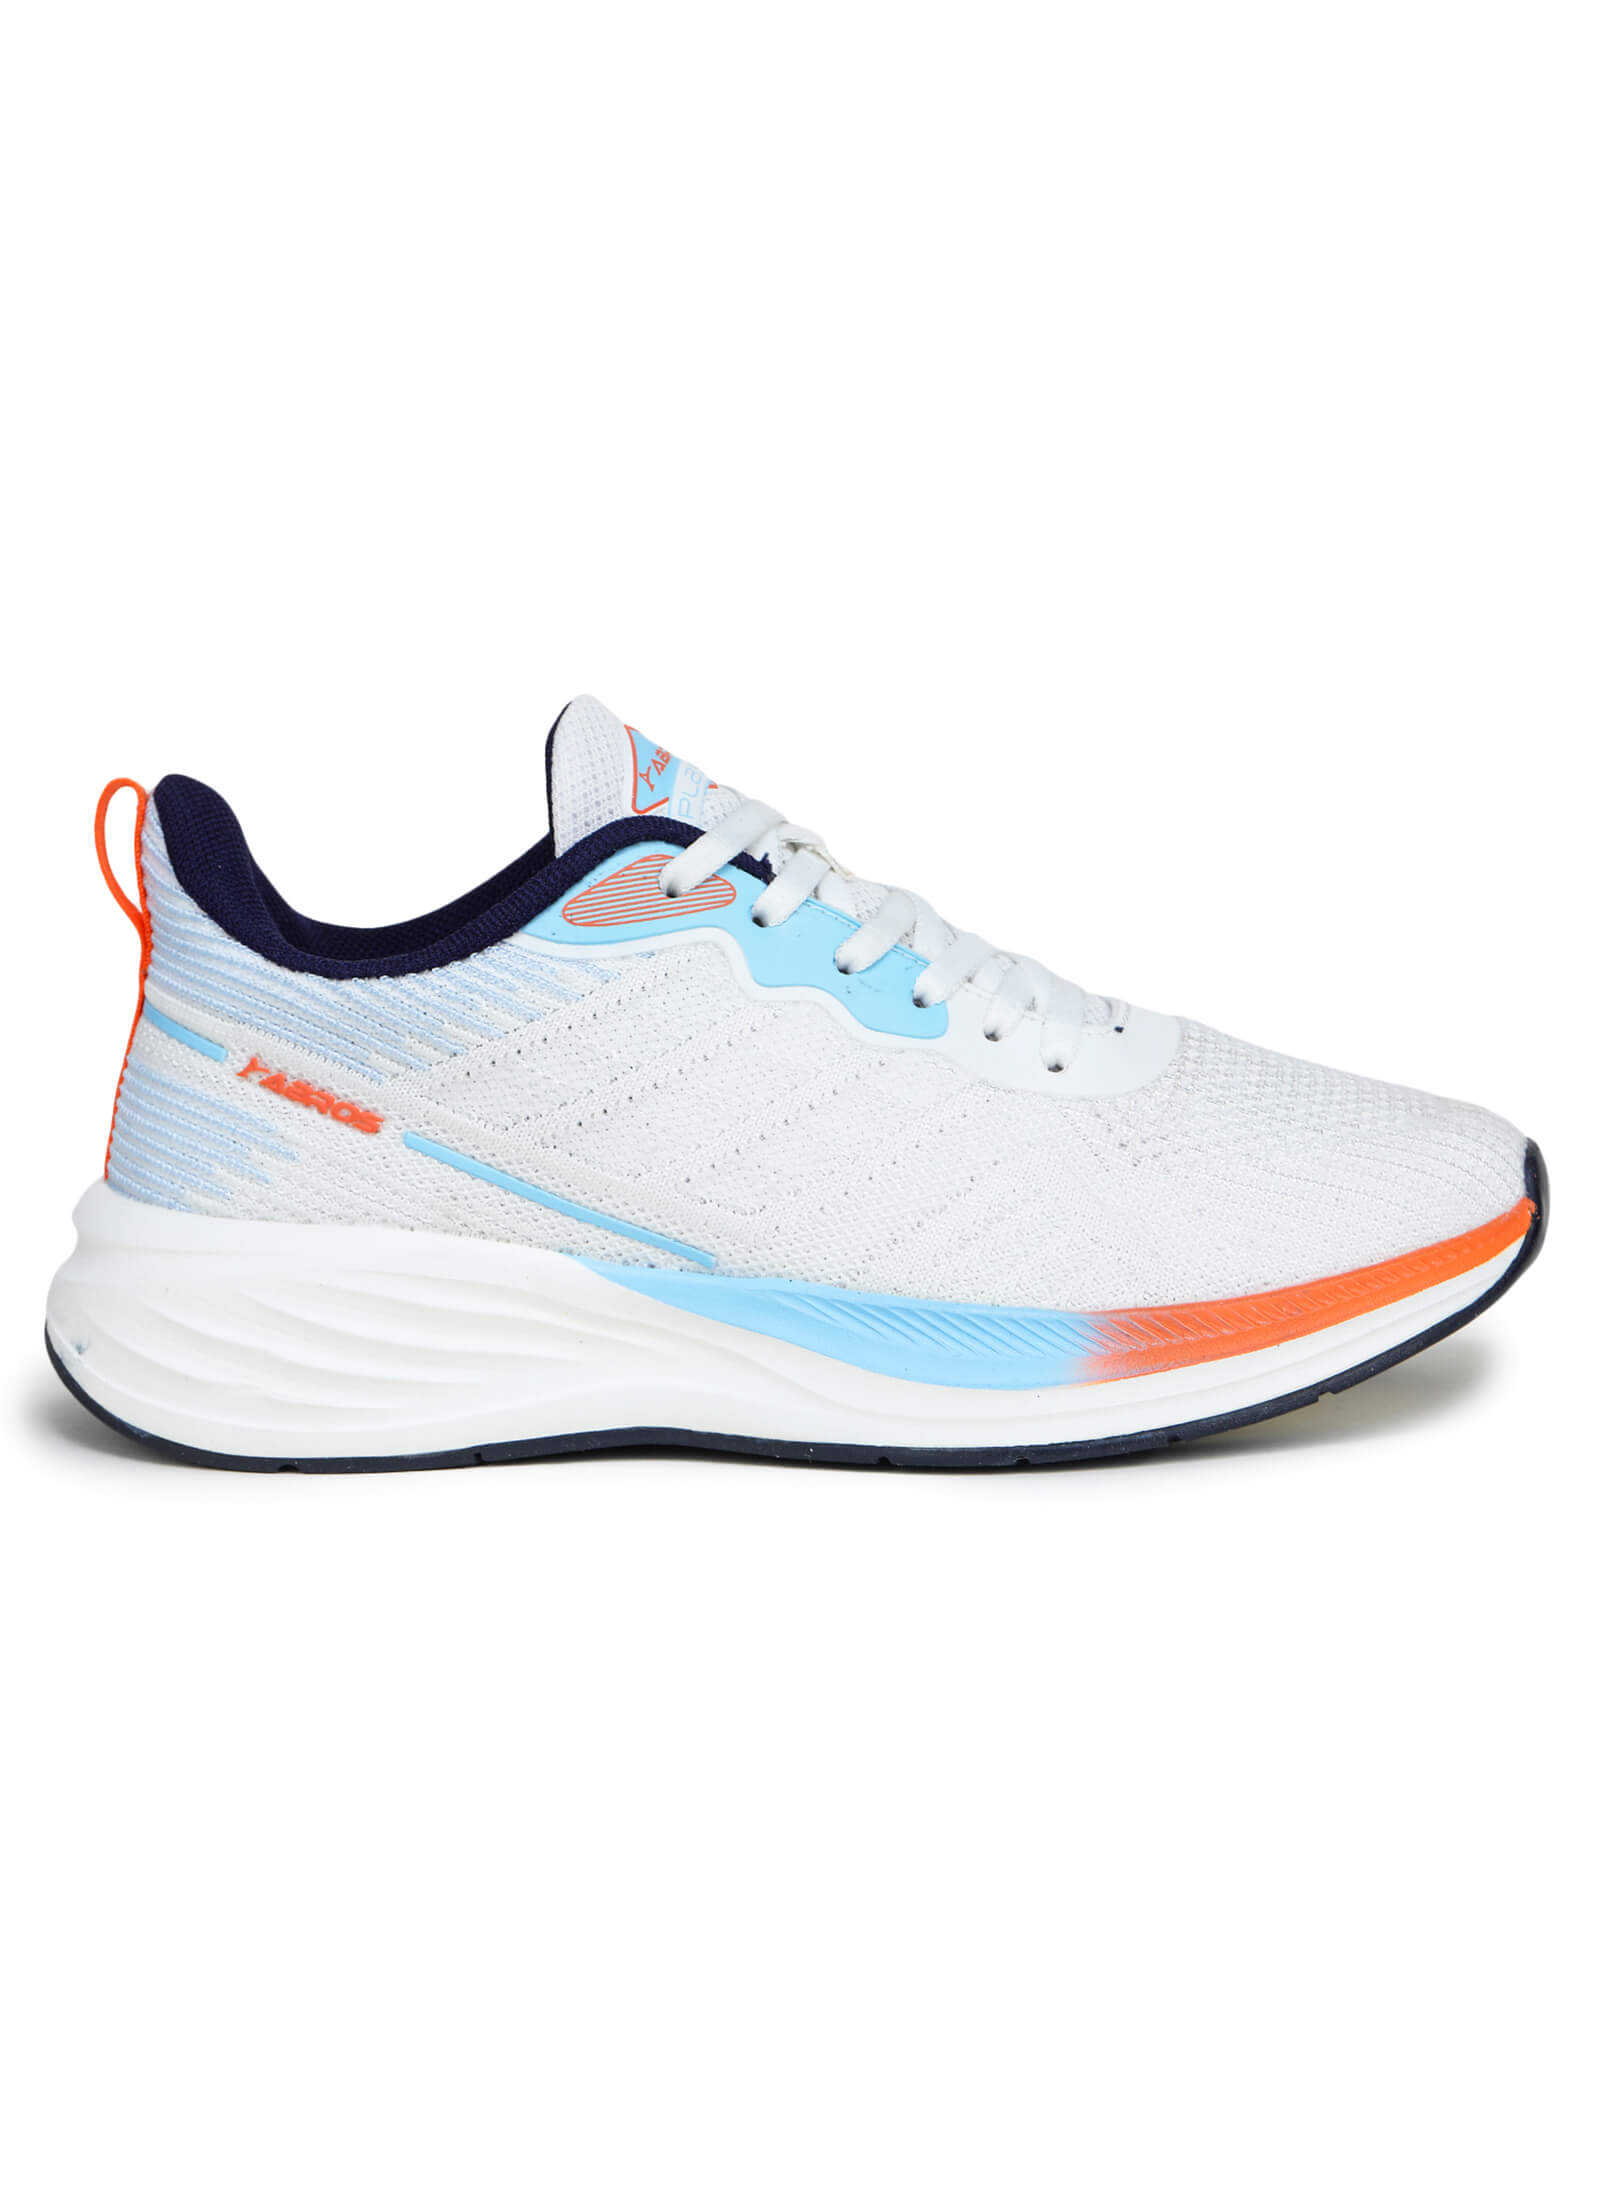 Dice Sports Shoes For Men